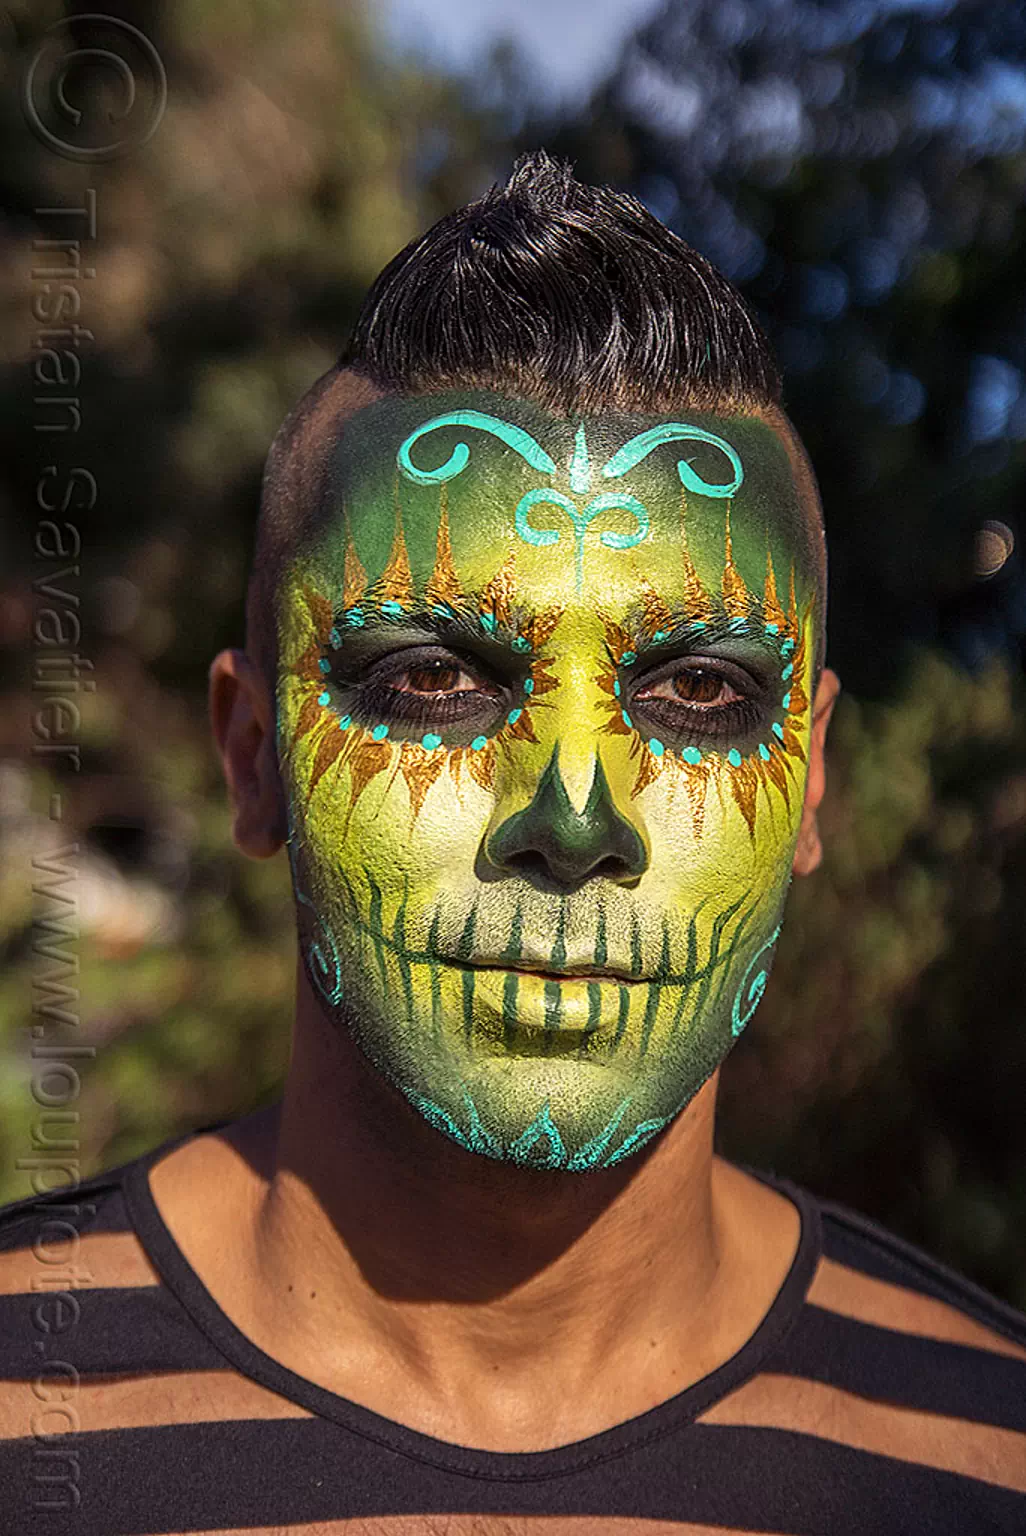 suliman nawid - green sugar skull makeup, day of the dead, dia de los muertos, face painting, facepaint, halloween, man, sugar skull makeup, suliman nawid